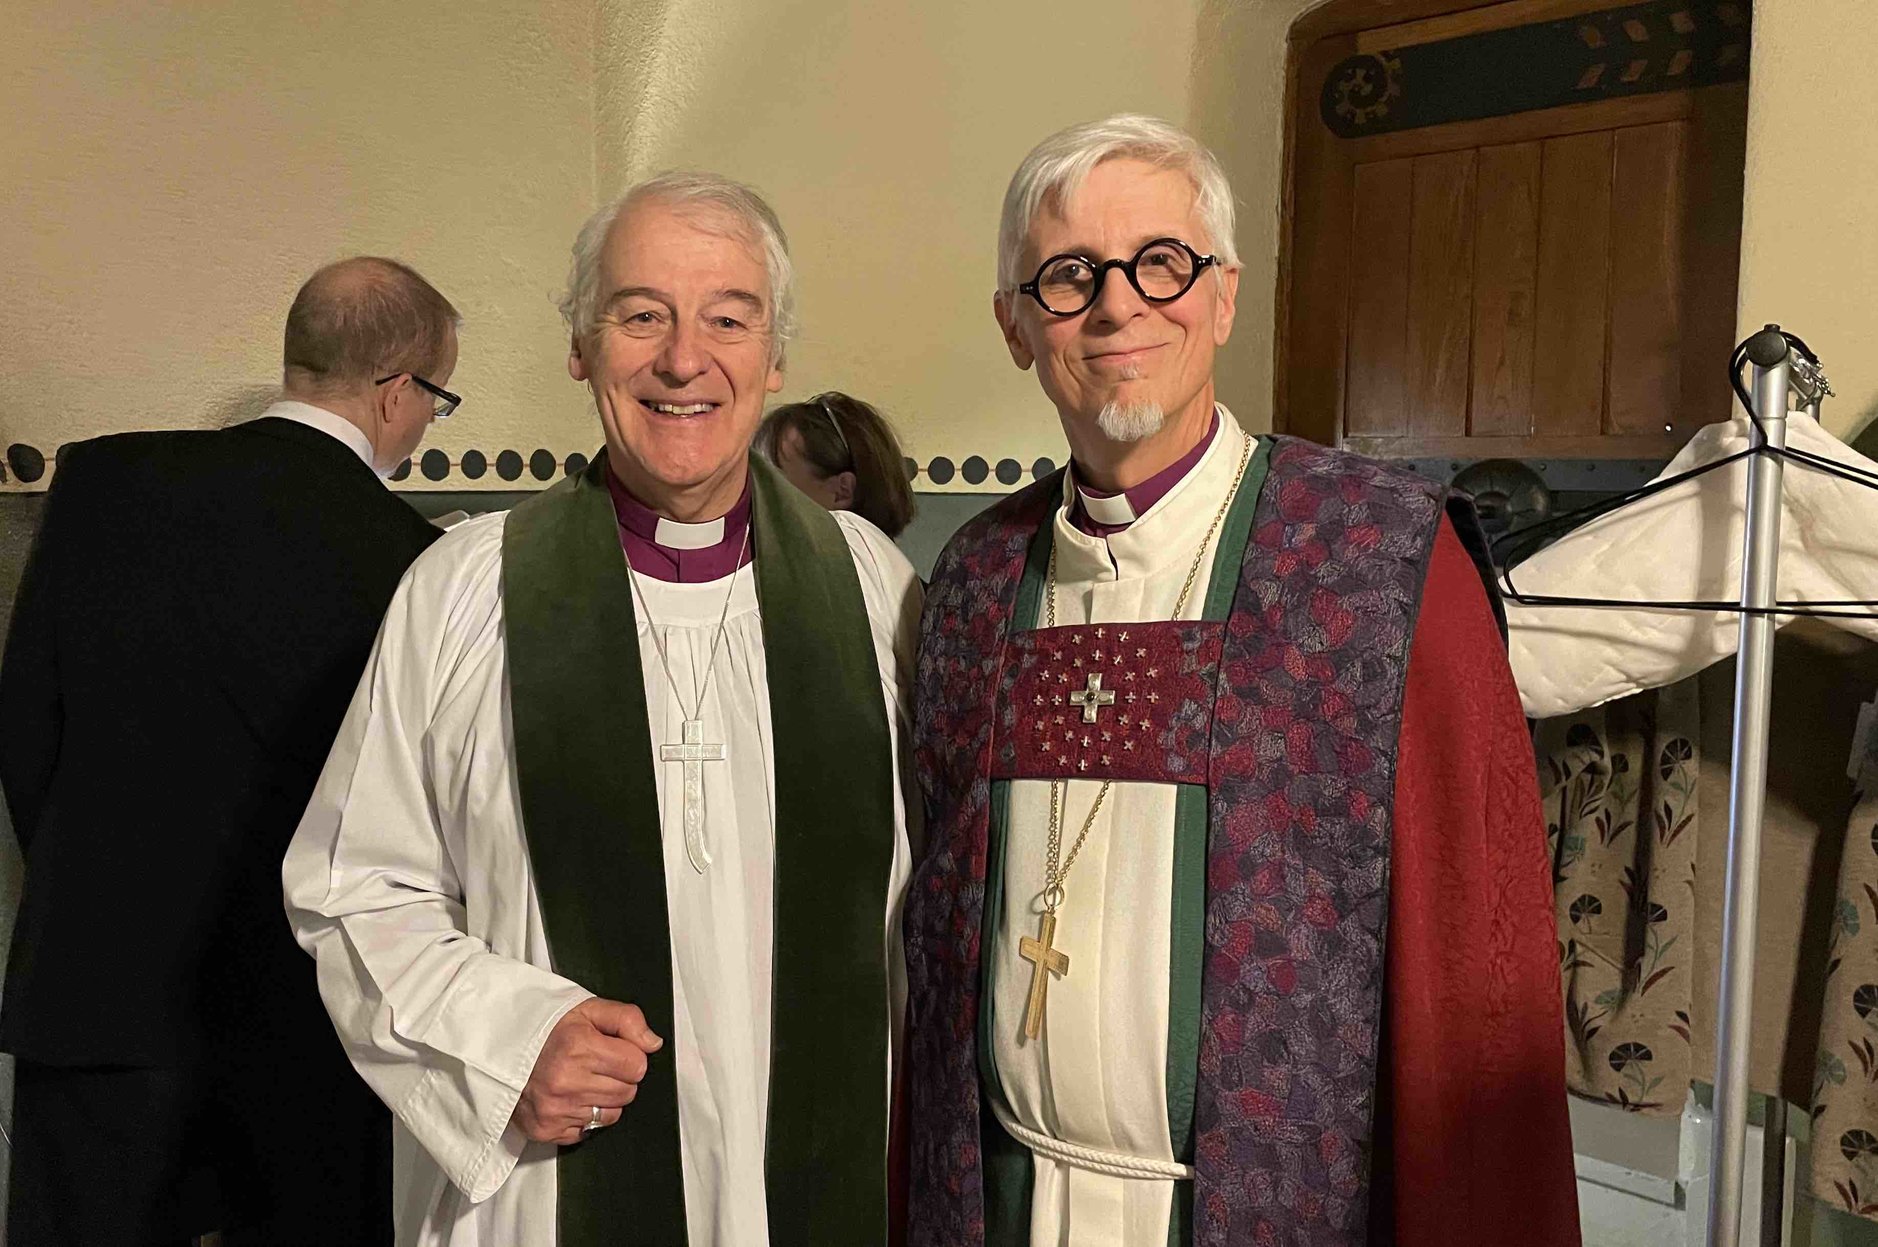 Archbishop Michael Jackson with the Bishop of Tampere, the Rt Revd Matti Repo.